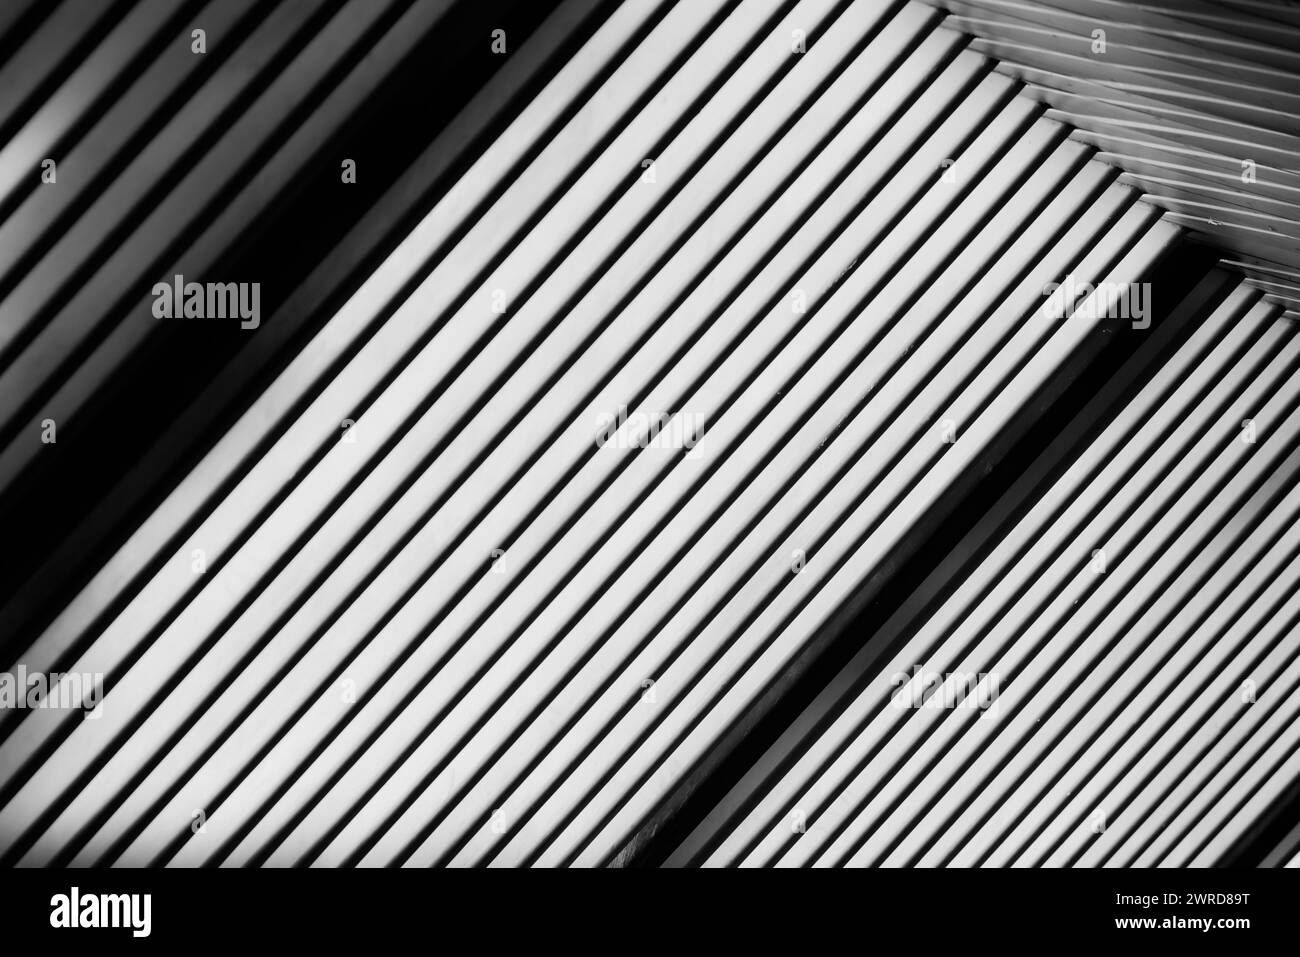 Diagonal lines of wood and metal tiles monochrome construction black and white Stock Photo